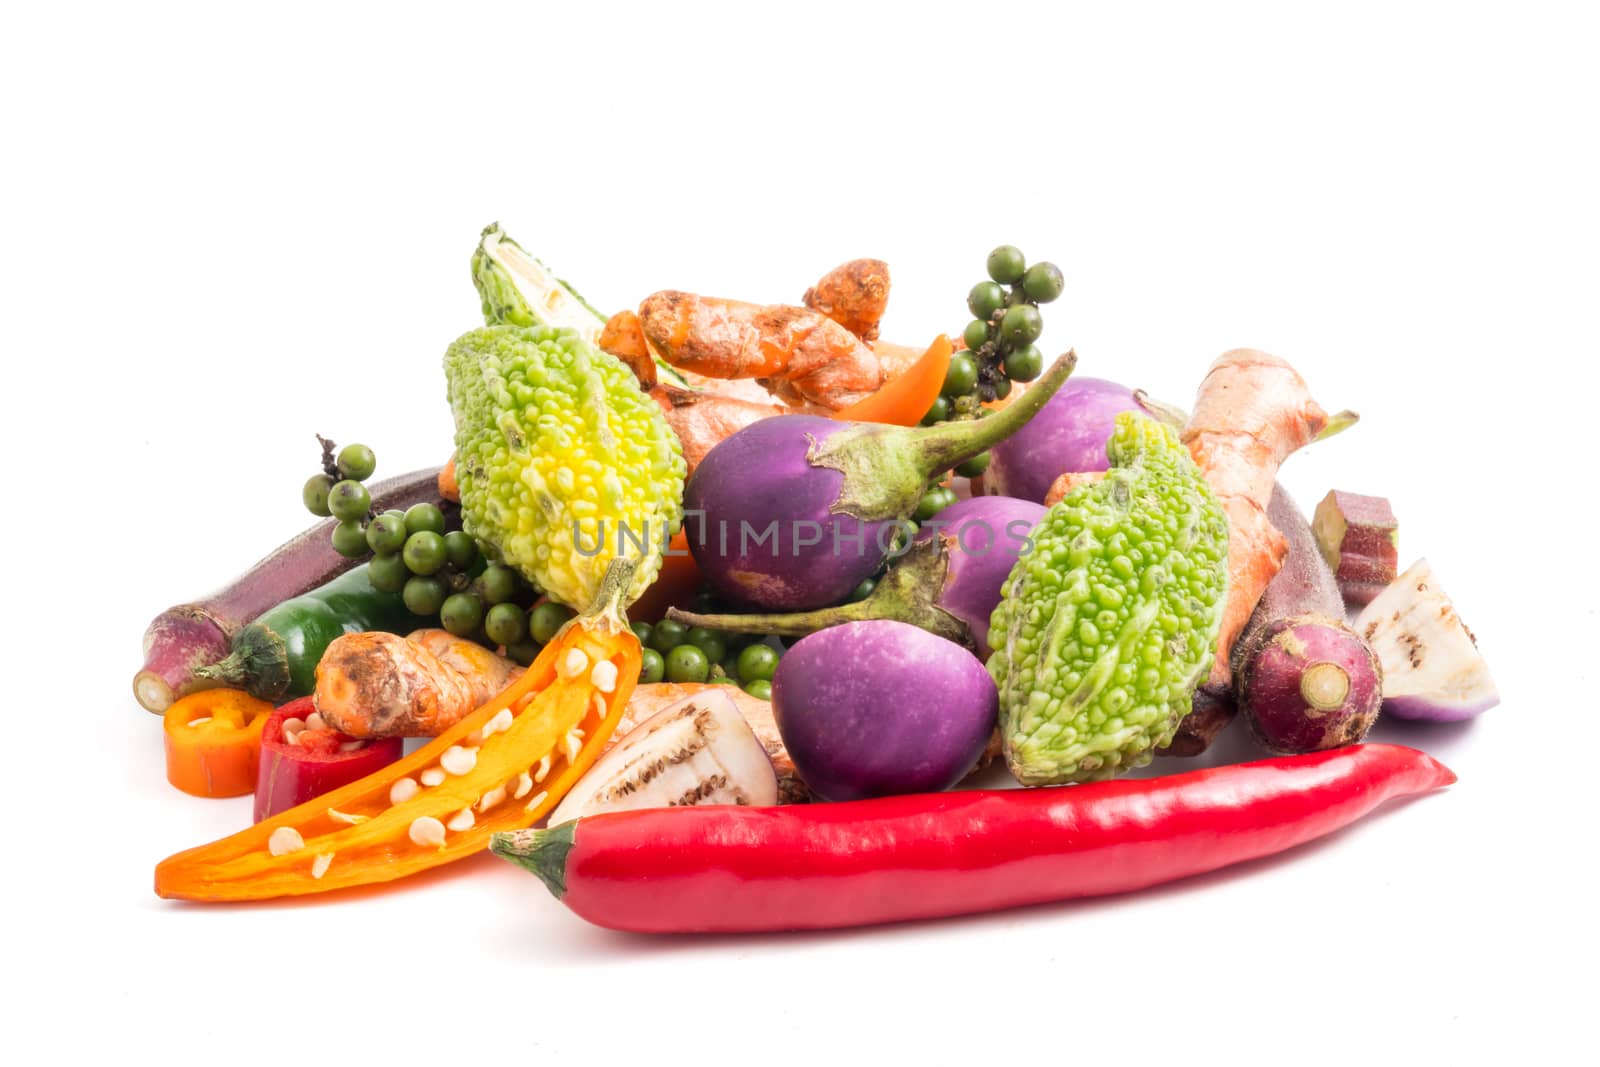 Group of fresh vegetables and herbs on white background.